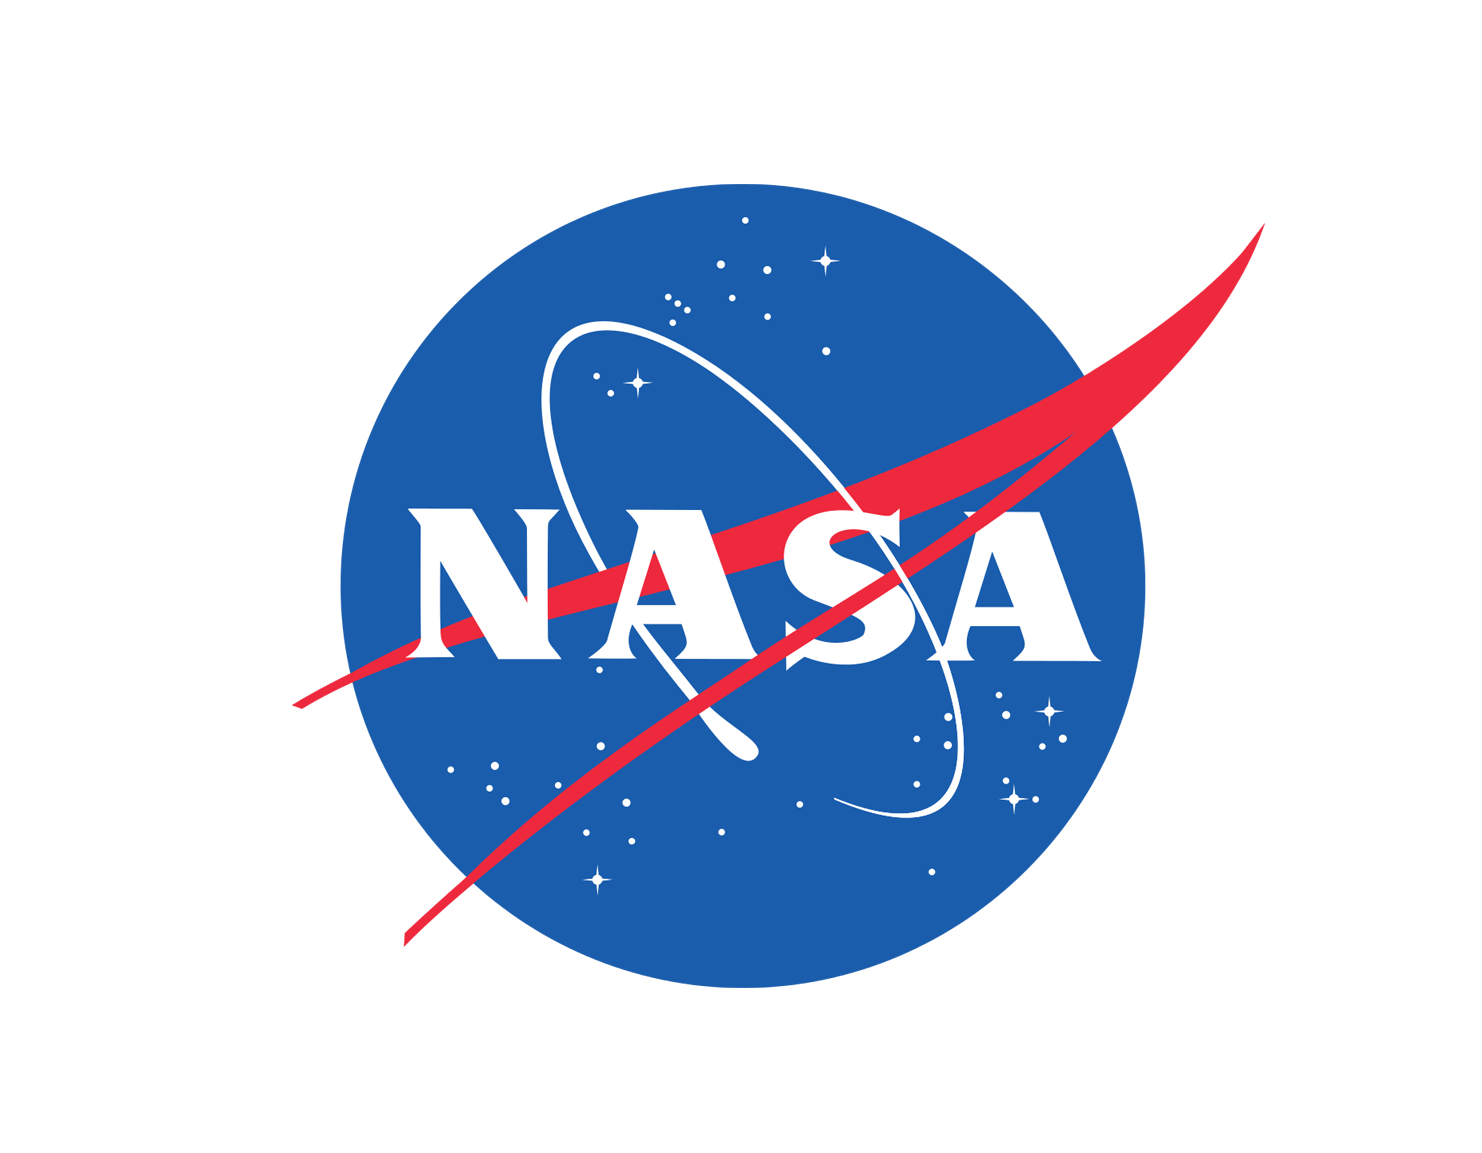 Webinar recording – What can we learn from NASA about leadership?